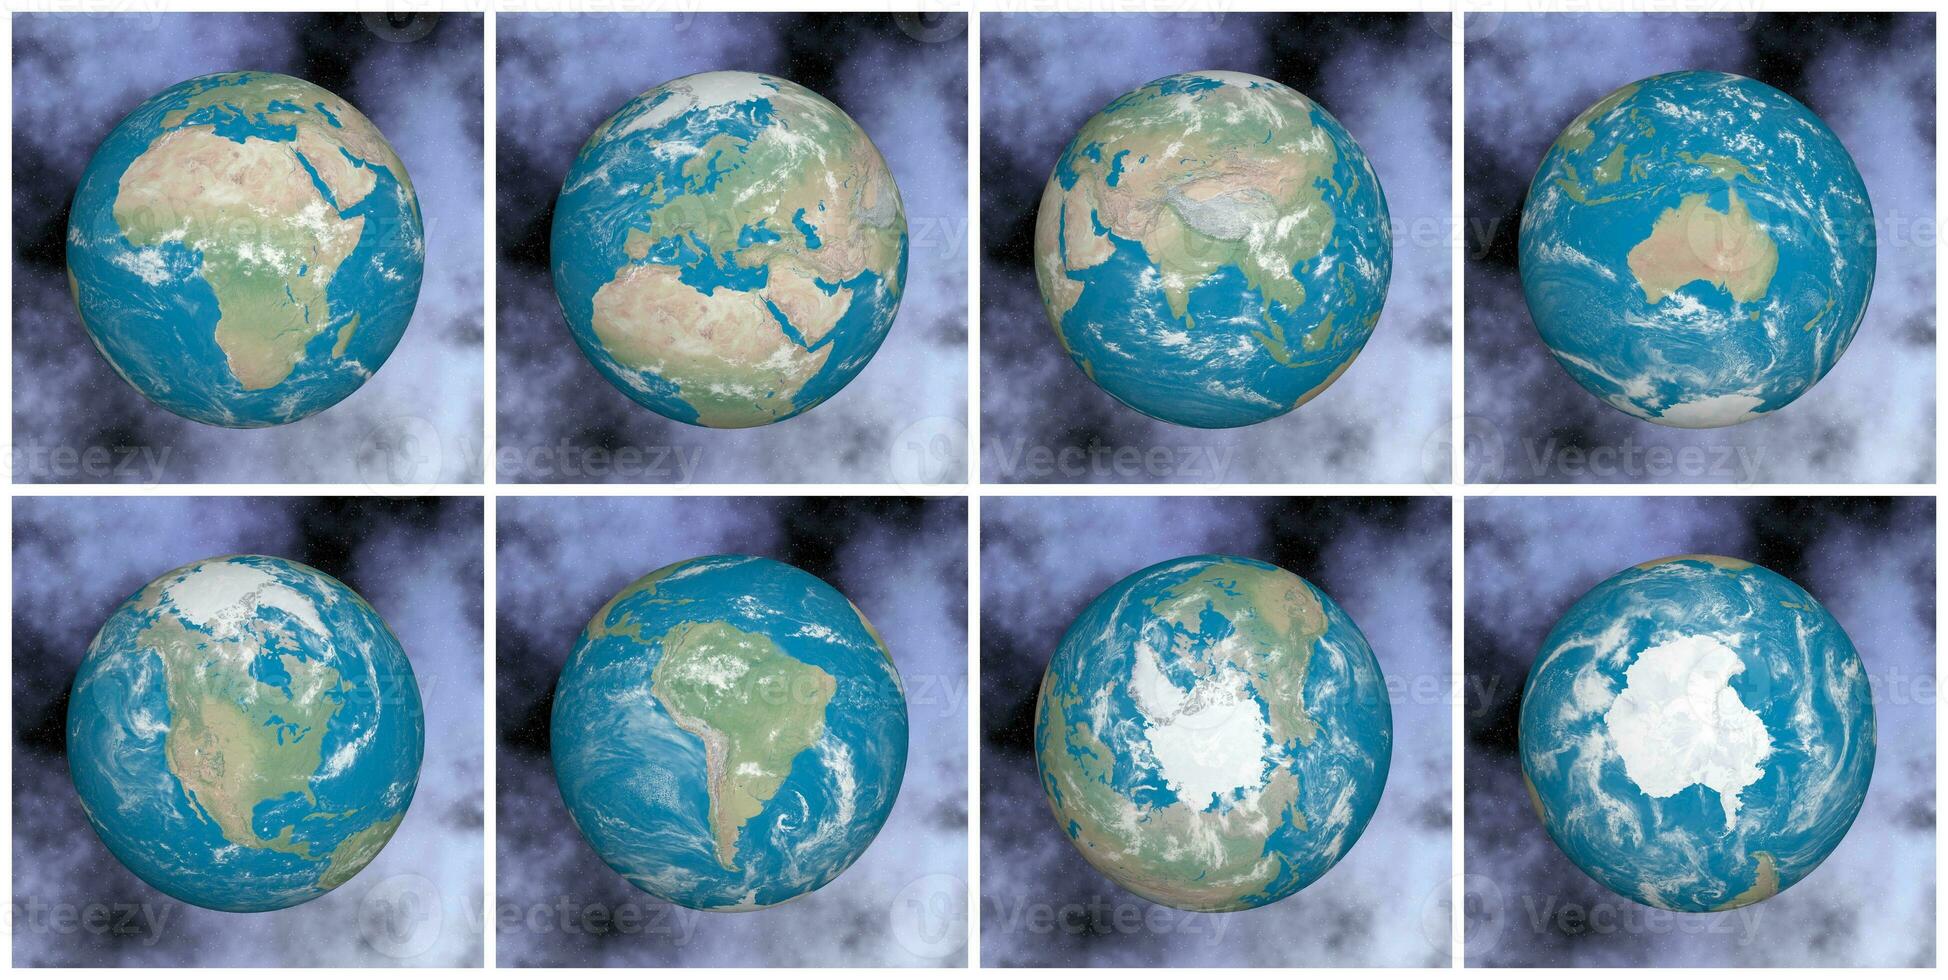 Continents on the earth - 3D render photo